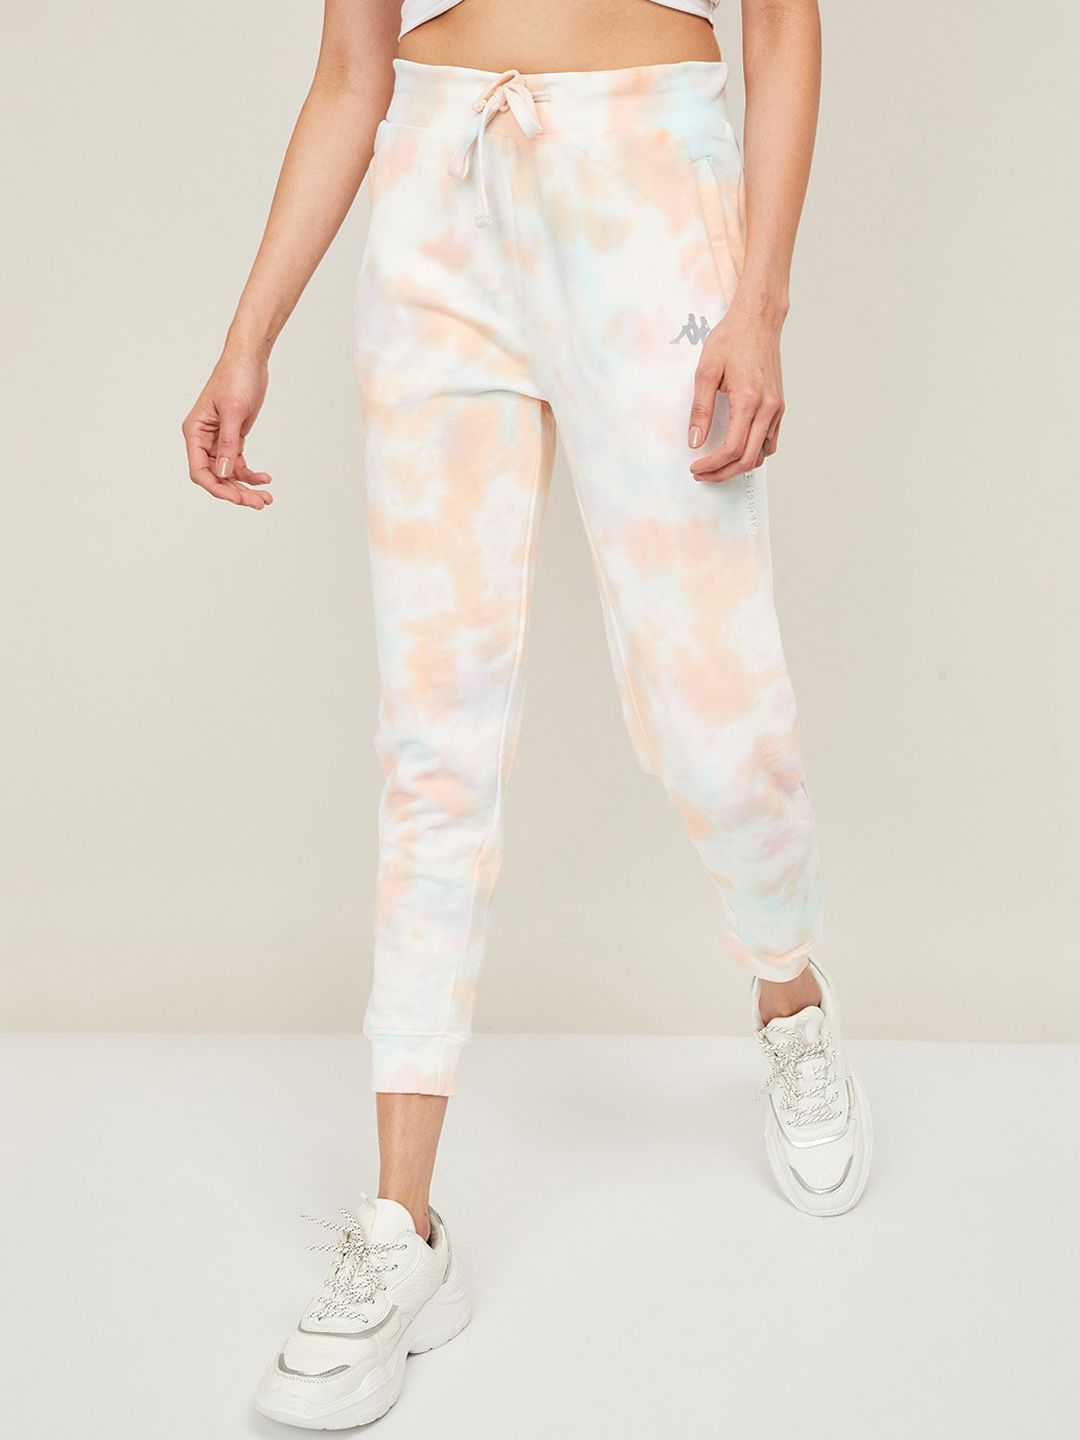 Kappa Women Pink & White Printed Relaxed Fit Cotton Joggers Price in India